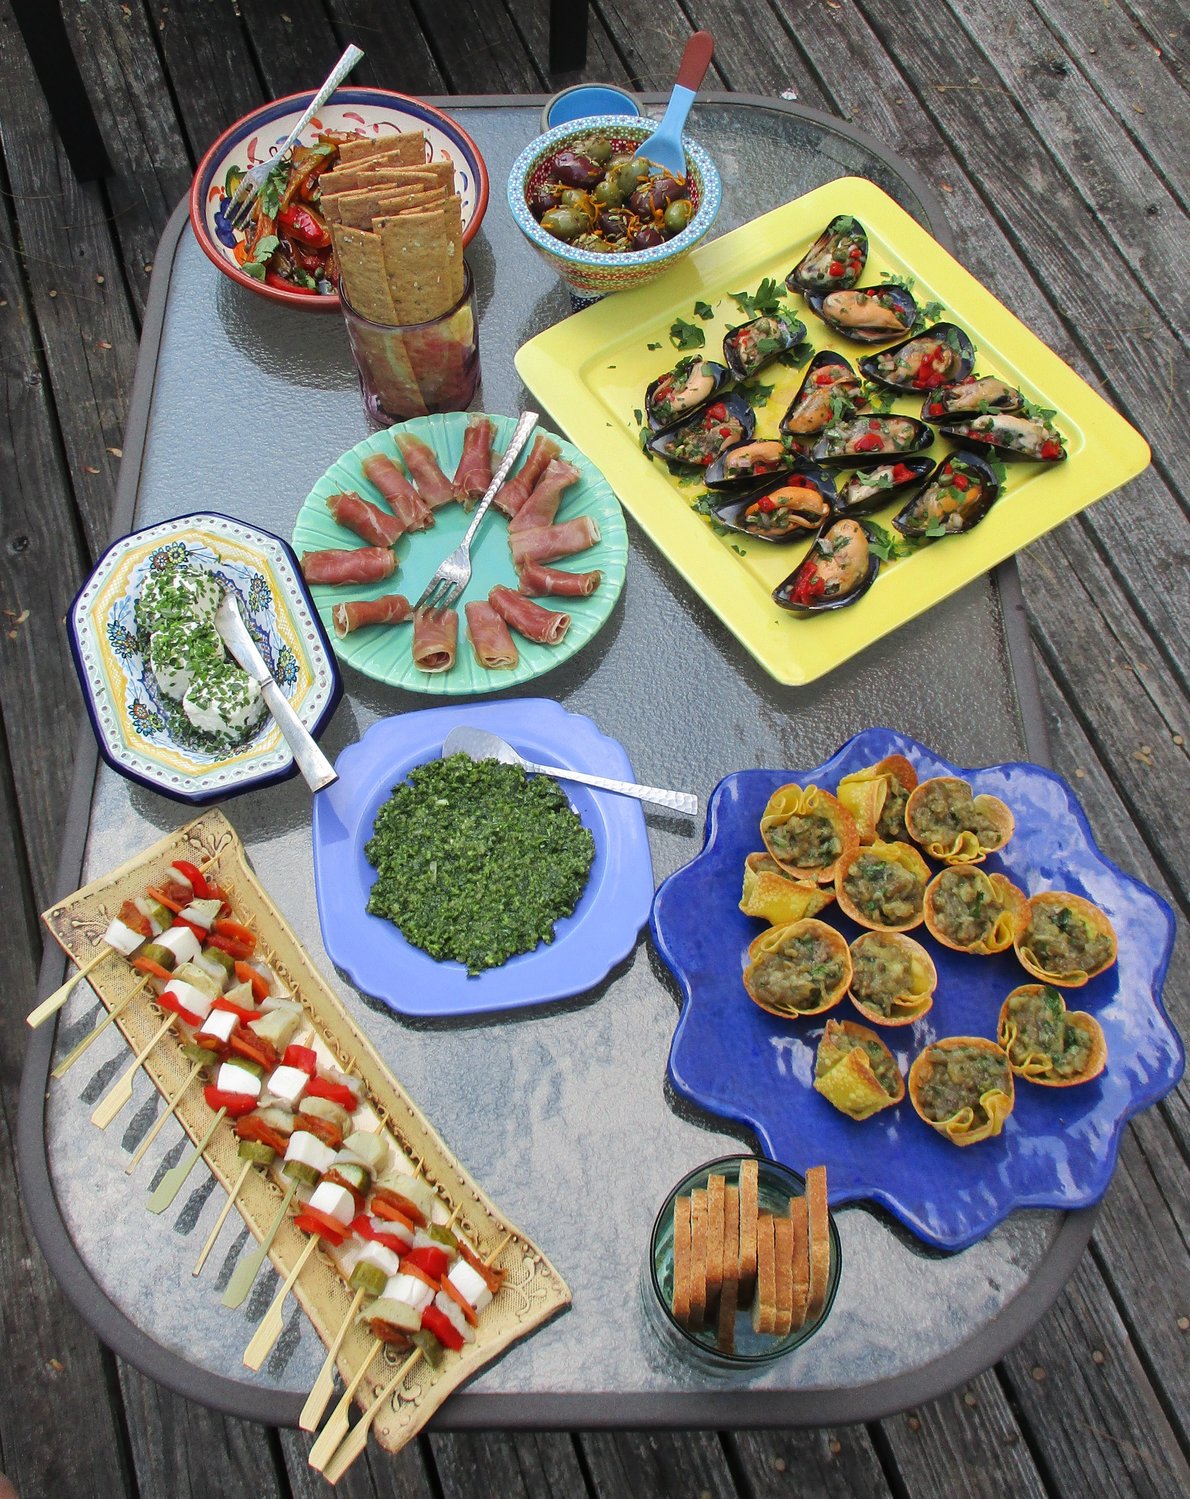 A display of tapas dishes.